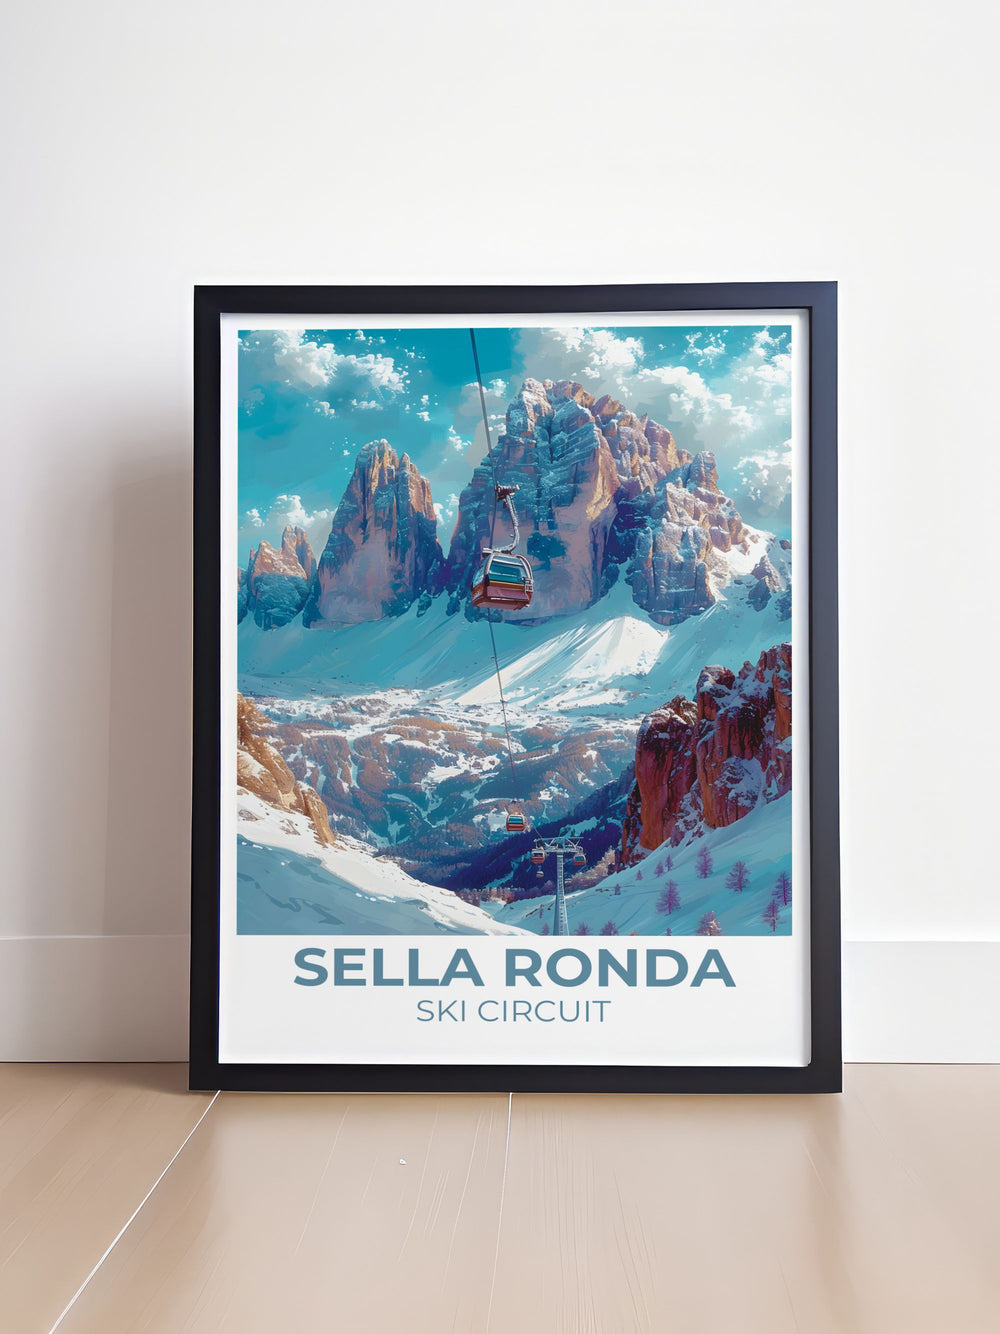 Experience the elegance of Sella Ronda Ski Circuit with our Wall Art, showcasing dynamic slopes and picturesque alpine scenery in stunning detail.